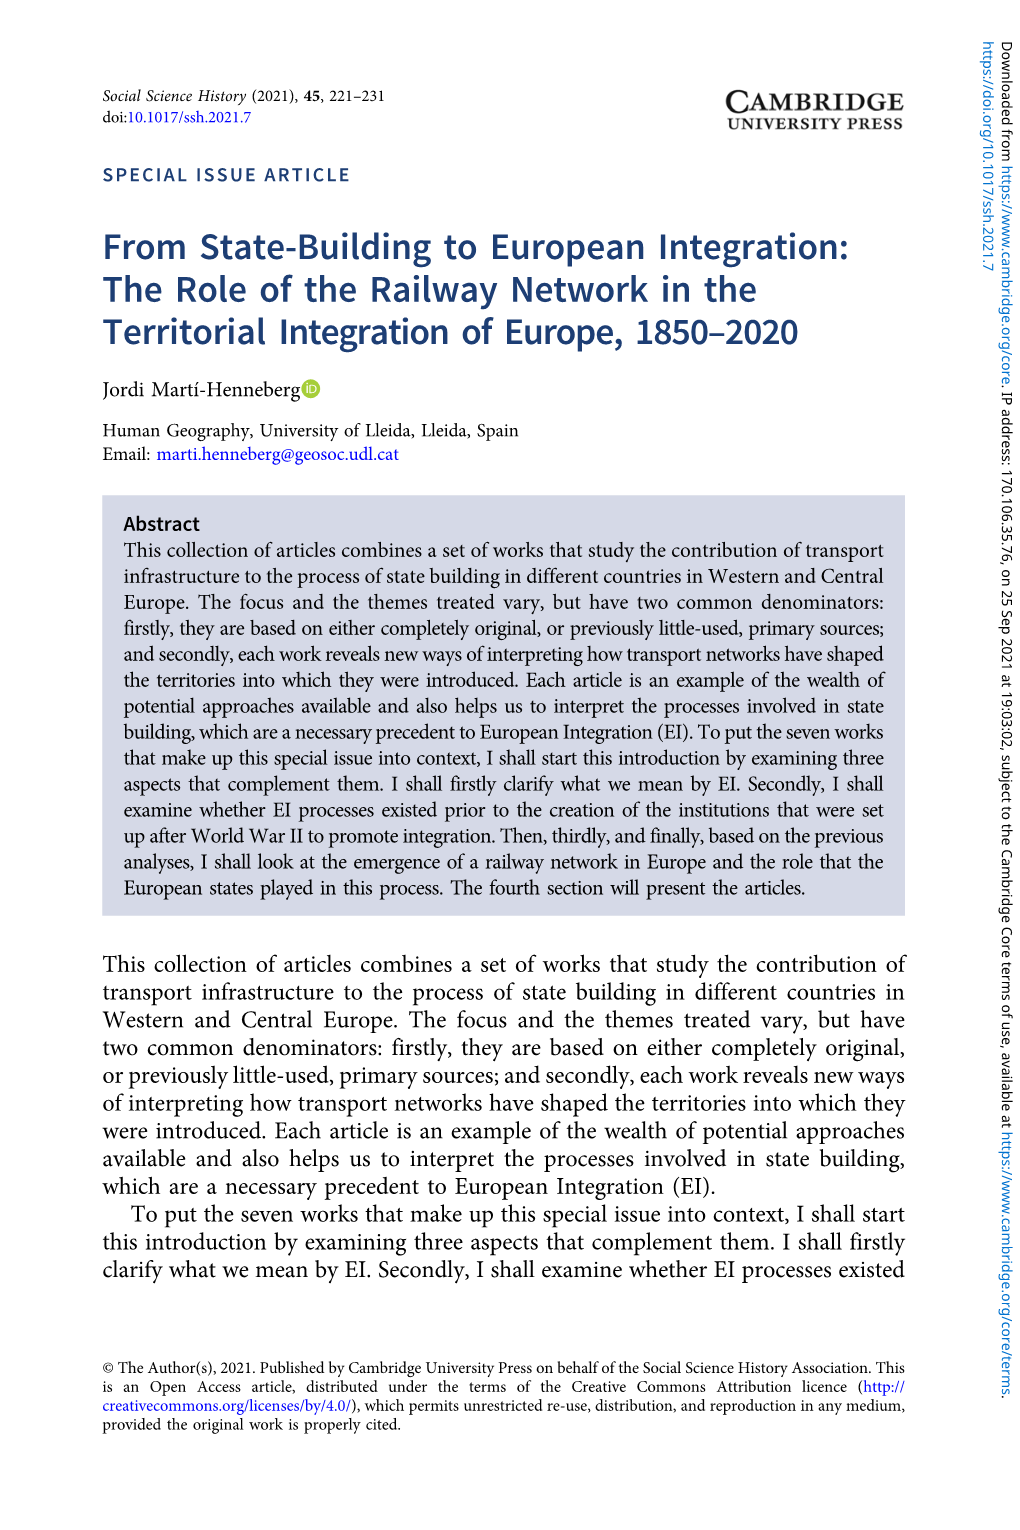 From State-Building to European Integration: the Role of the Railway Network in the Territorial Integration of Europe, 1850–2020